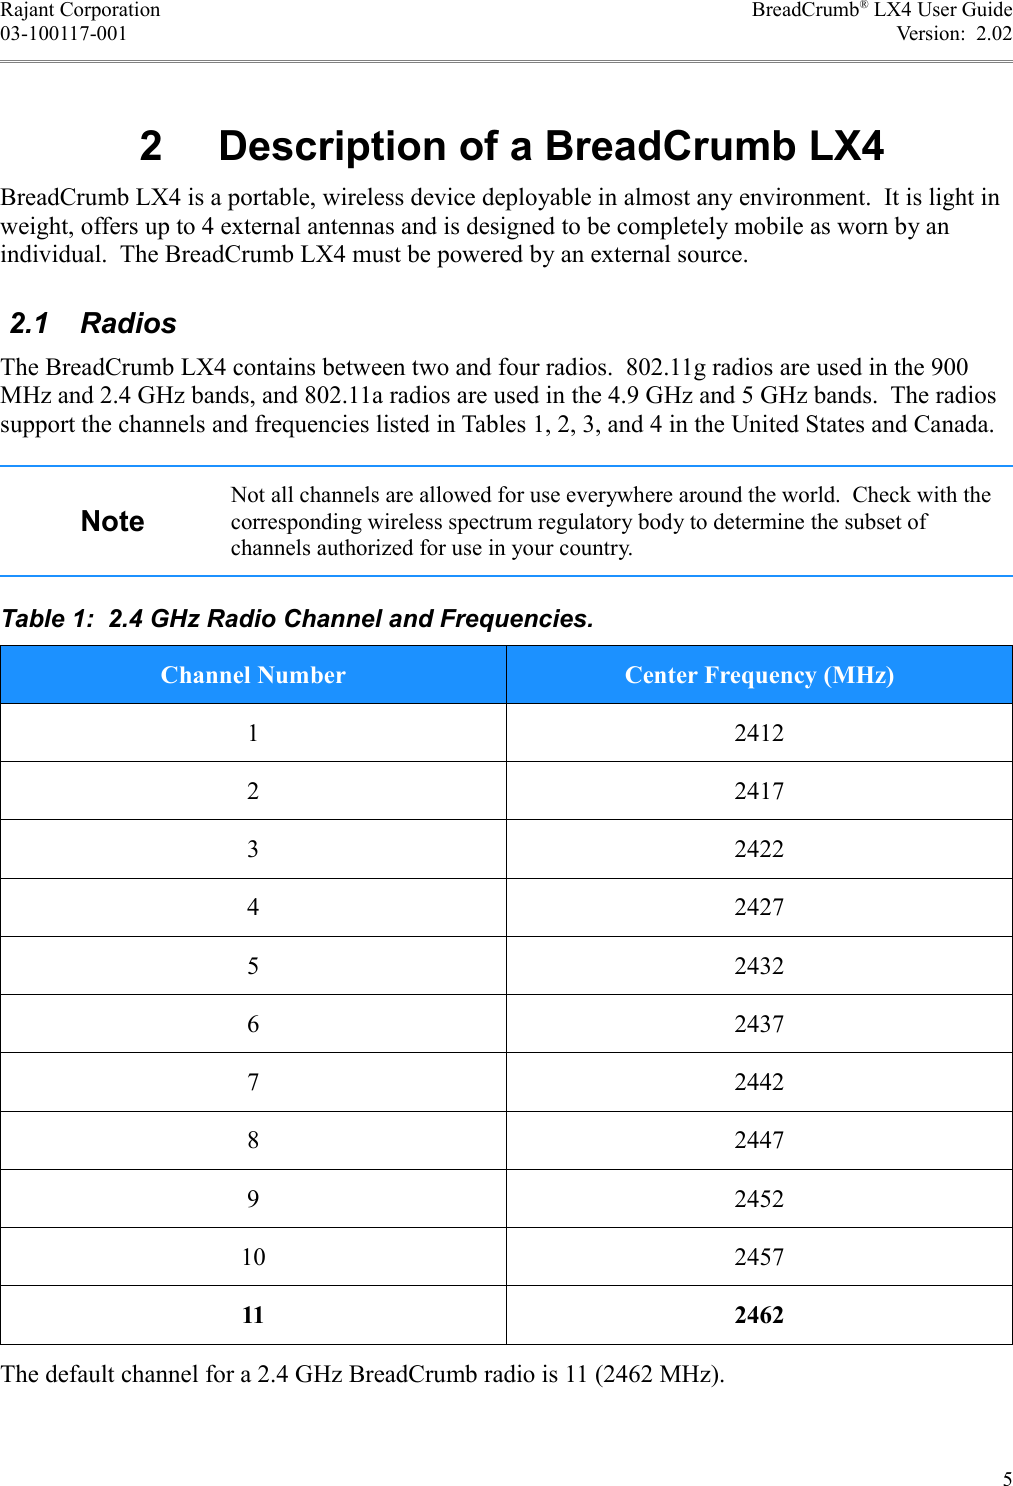 Rajant Corporation BreadCrumb® LX4 User Guide03-100117-001 Version:  2.02 2  Description of a BreadCrumb LX4BreadCrumb LX4 is a portable, wireless device deployable in almost any environment.  It is light in weight, offers up to 4 external antennas and is designed to be completely mobile as worn by an individual.  The BreadCrumb LX4 must be powered by an external source. 2.1  RadiosThe BreadCrumb LX4 contains between two and four radios.  802.11g radios are used in the 900 MHz and 2.4 GHz bands, and 802.11a radios are used in the 4.9 GHz and 5 GHz bands.  The radios support the channels and frequencies listed in Tables 1, 2, 3, and 4 in the United States and Canada.NoteNot all channels are allowed for use everywhere around the world.  Check with the corresponding wireless spectrum regulatory body to determine the subset of channels authorized for use in your country.Table 1:  2.4 GHz Radio Channel and Frequencies.Channel Number Center Frequency (MHz)1 24122 24173 24224 24275 24326 24377 24428 24479 245210 245711 2462The default channel for a 2.4 GHz BreadCrumb radio is 11 (2462 MHz).5